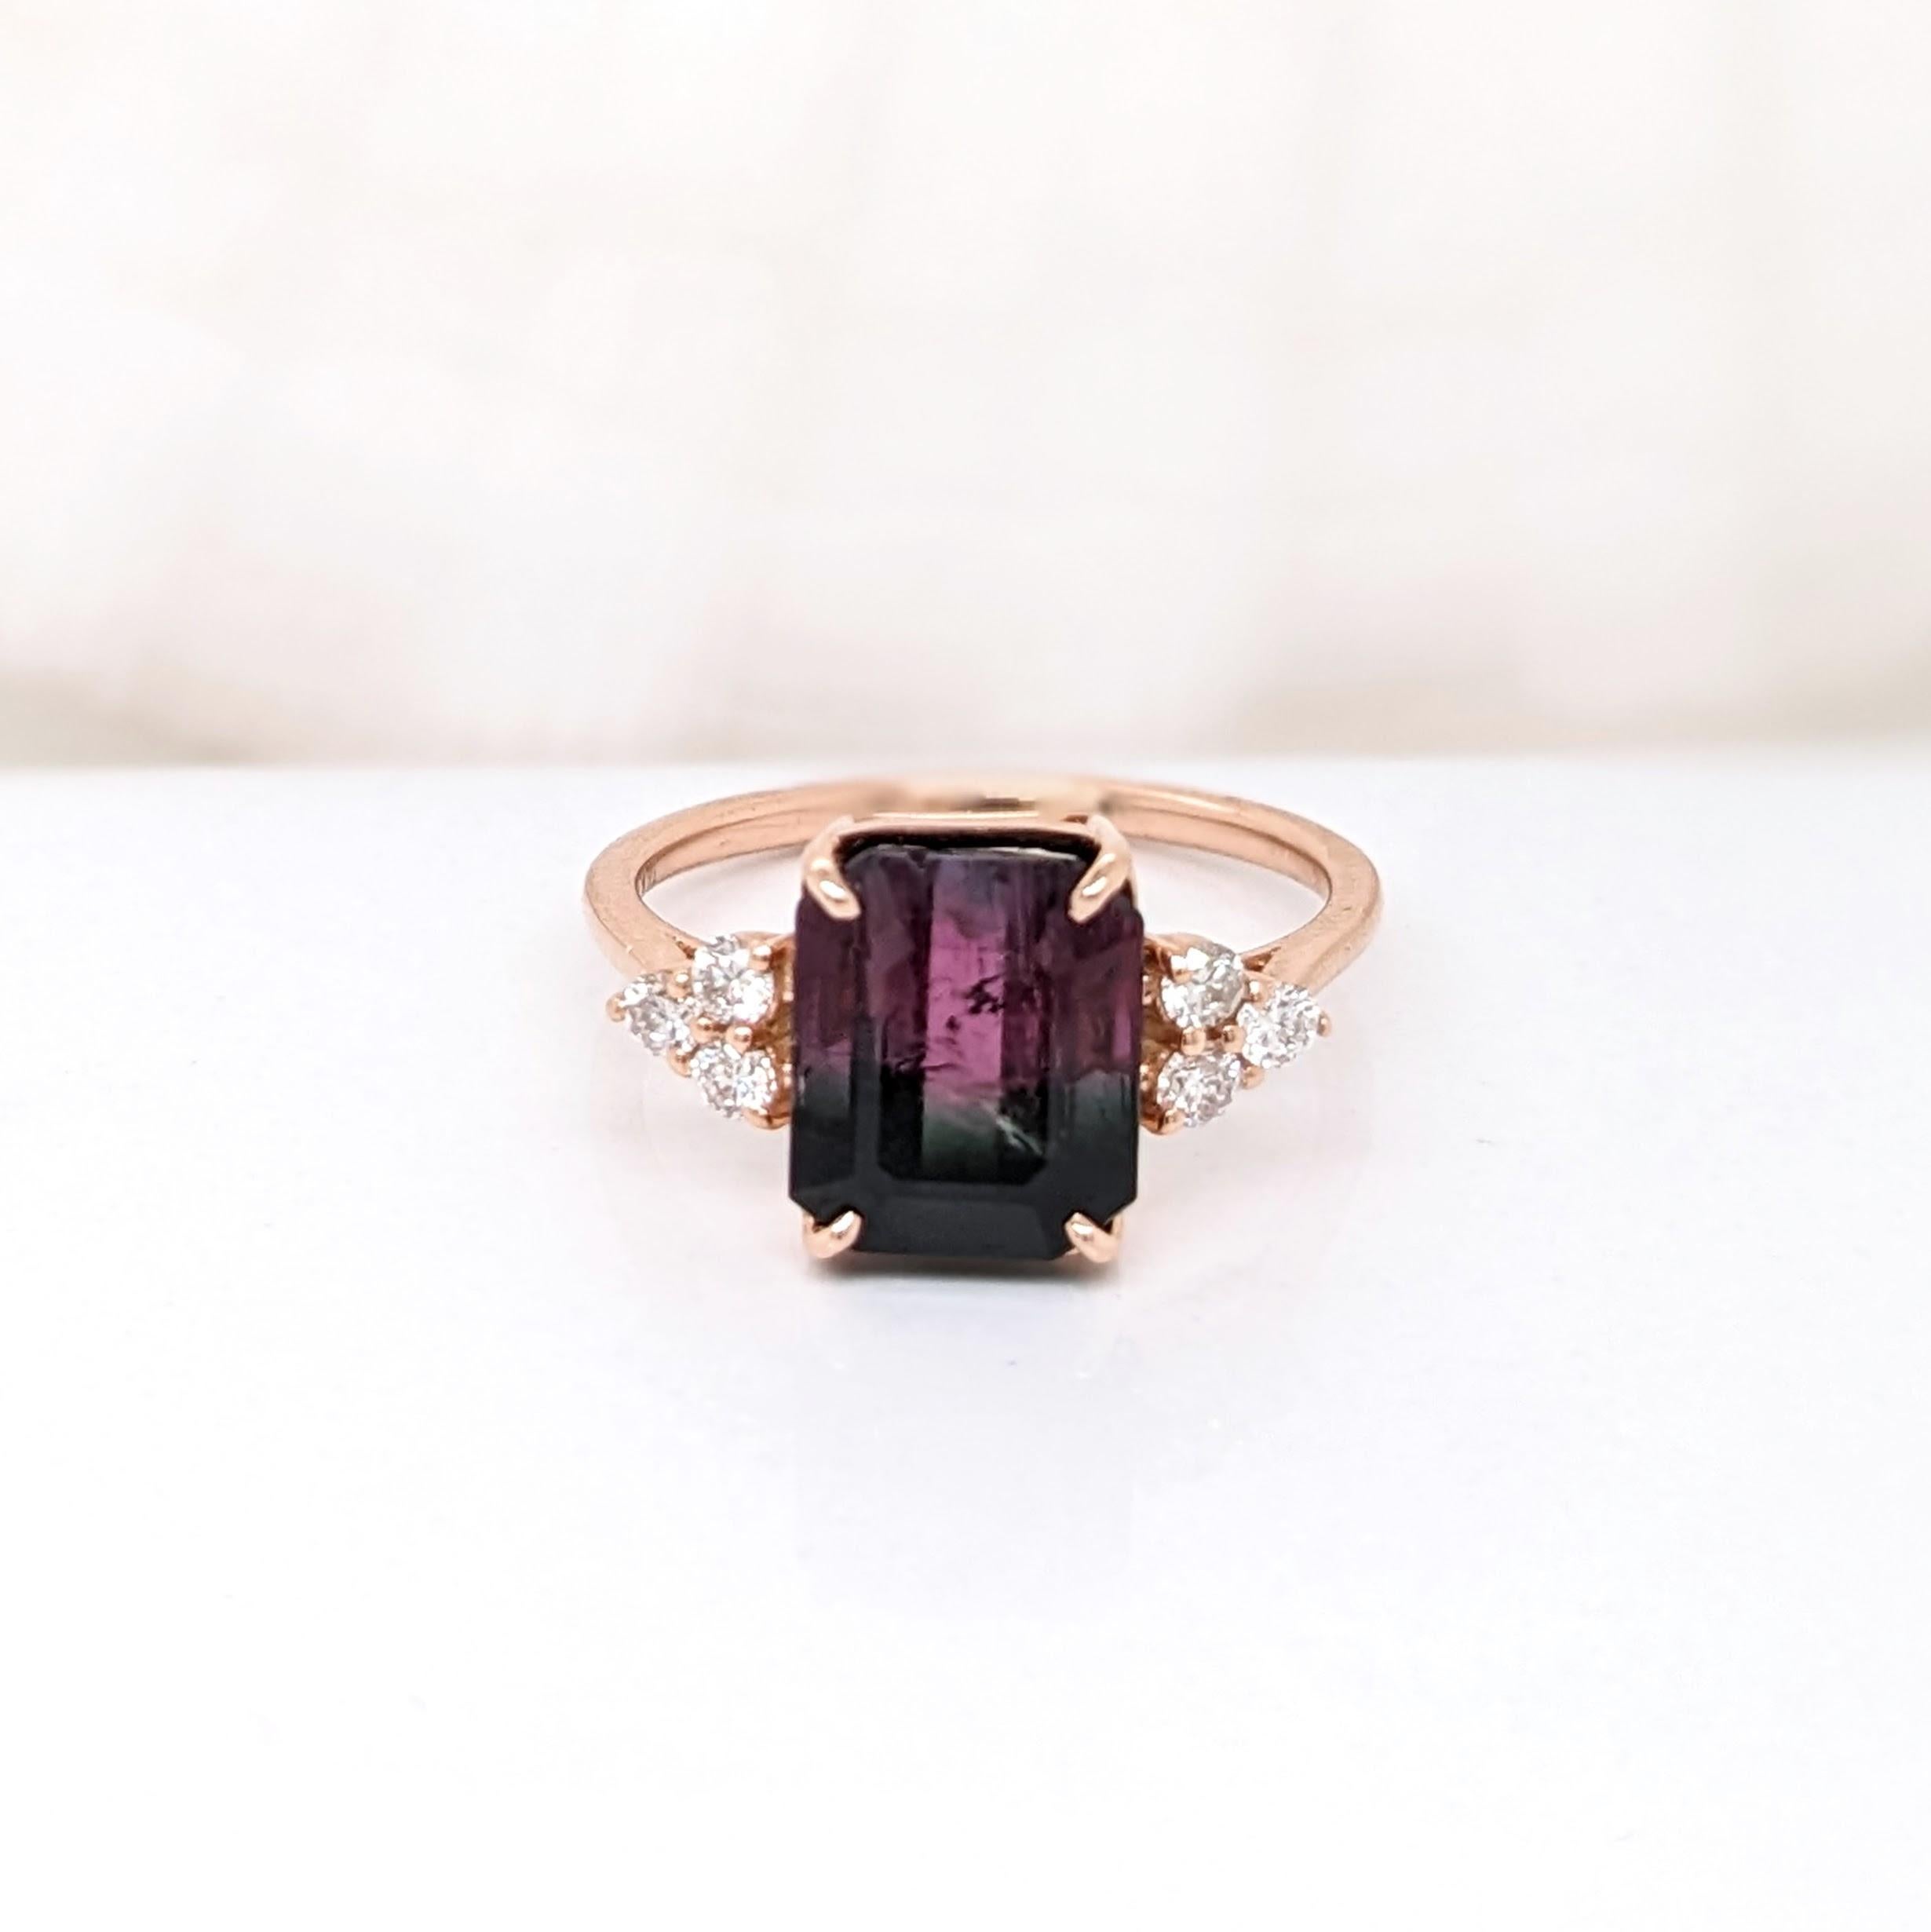 This ring features a beautiful pink and green watermelon Tourmaline with gorgeous saturated hues. It is set with sparkling natural diamond accents in 14k Yellow Gold. A gorgeous statement ring to showcase this unique stone!

Specifications

Item